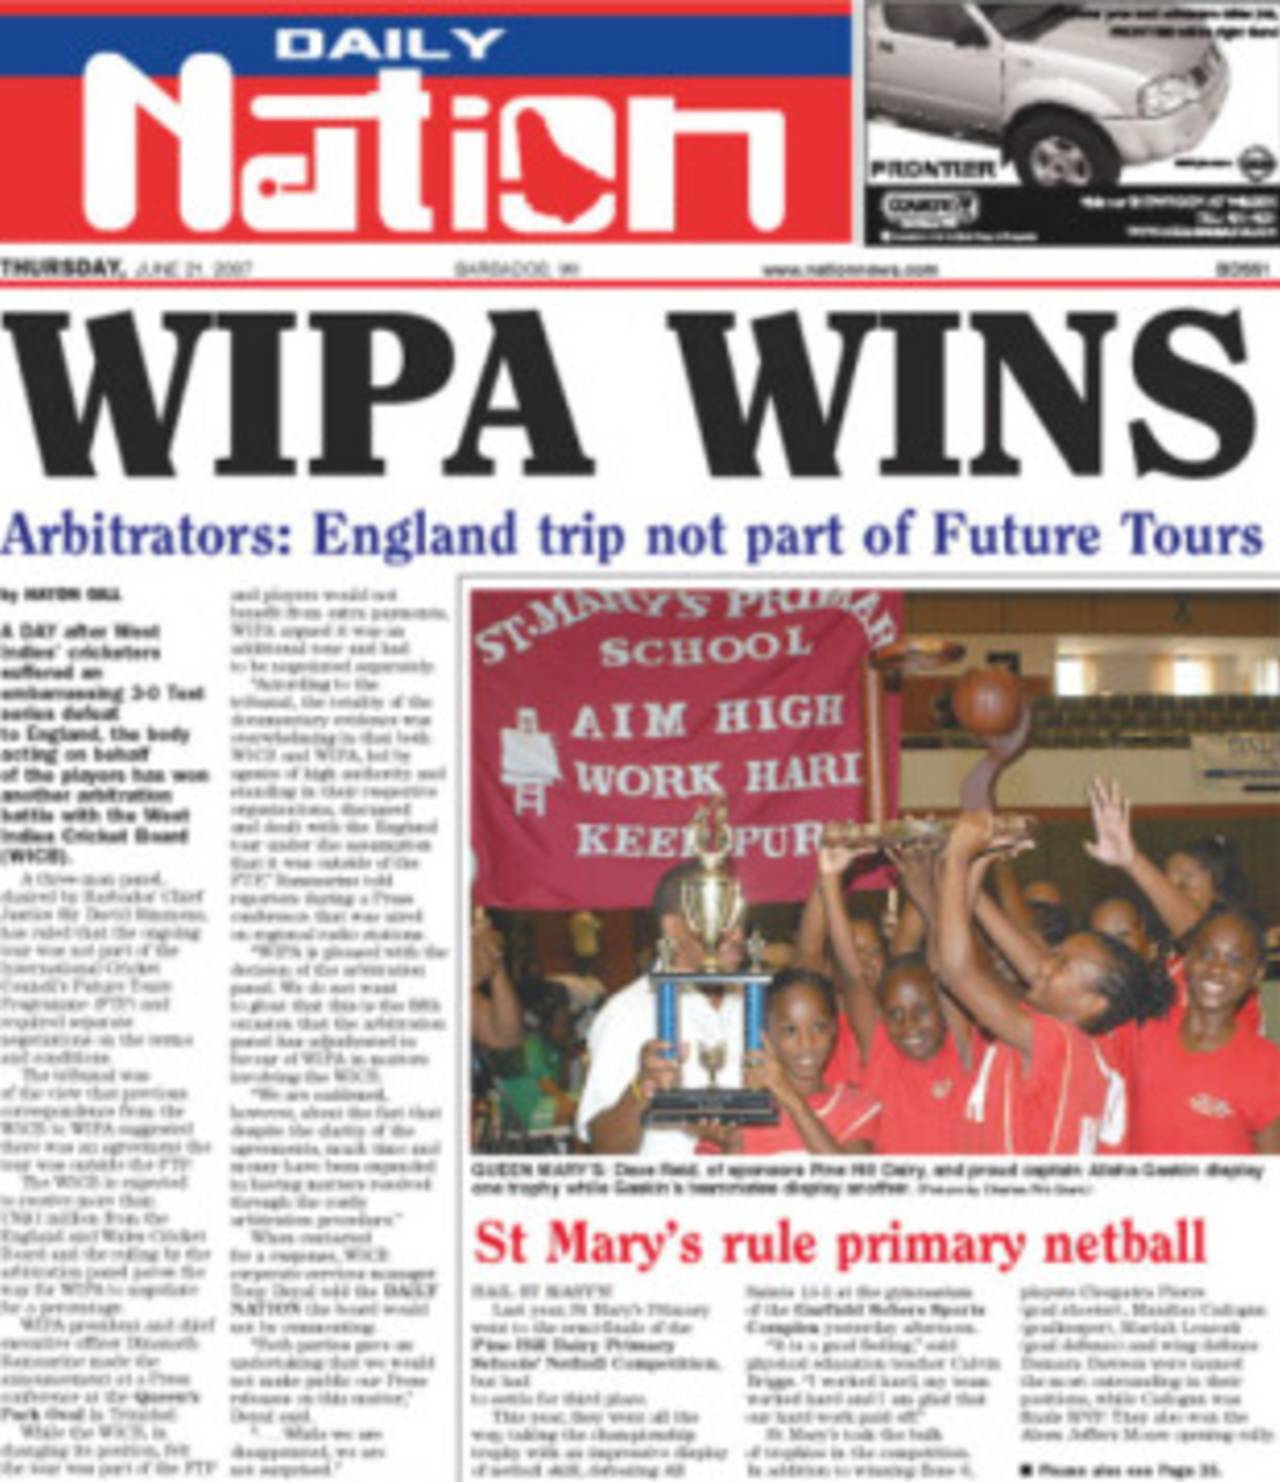 WIPA and WICB have been involved in several disputes over the years&nbsp;&nbsp;&bull;&nbsp;&nbsp;The Nation